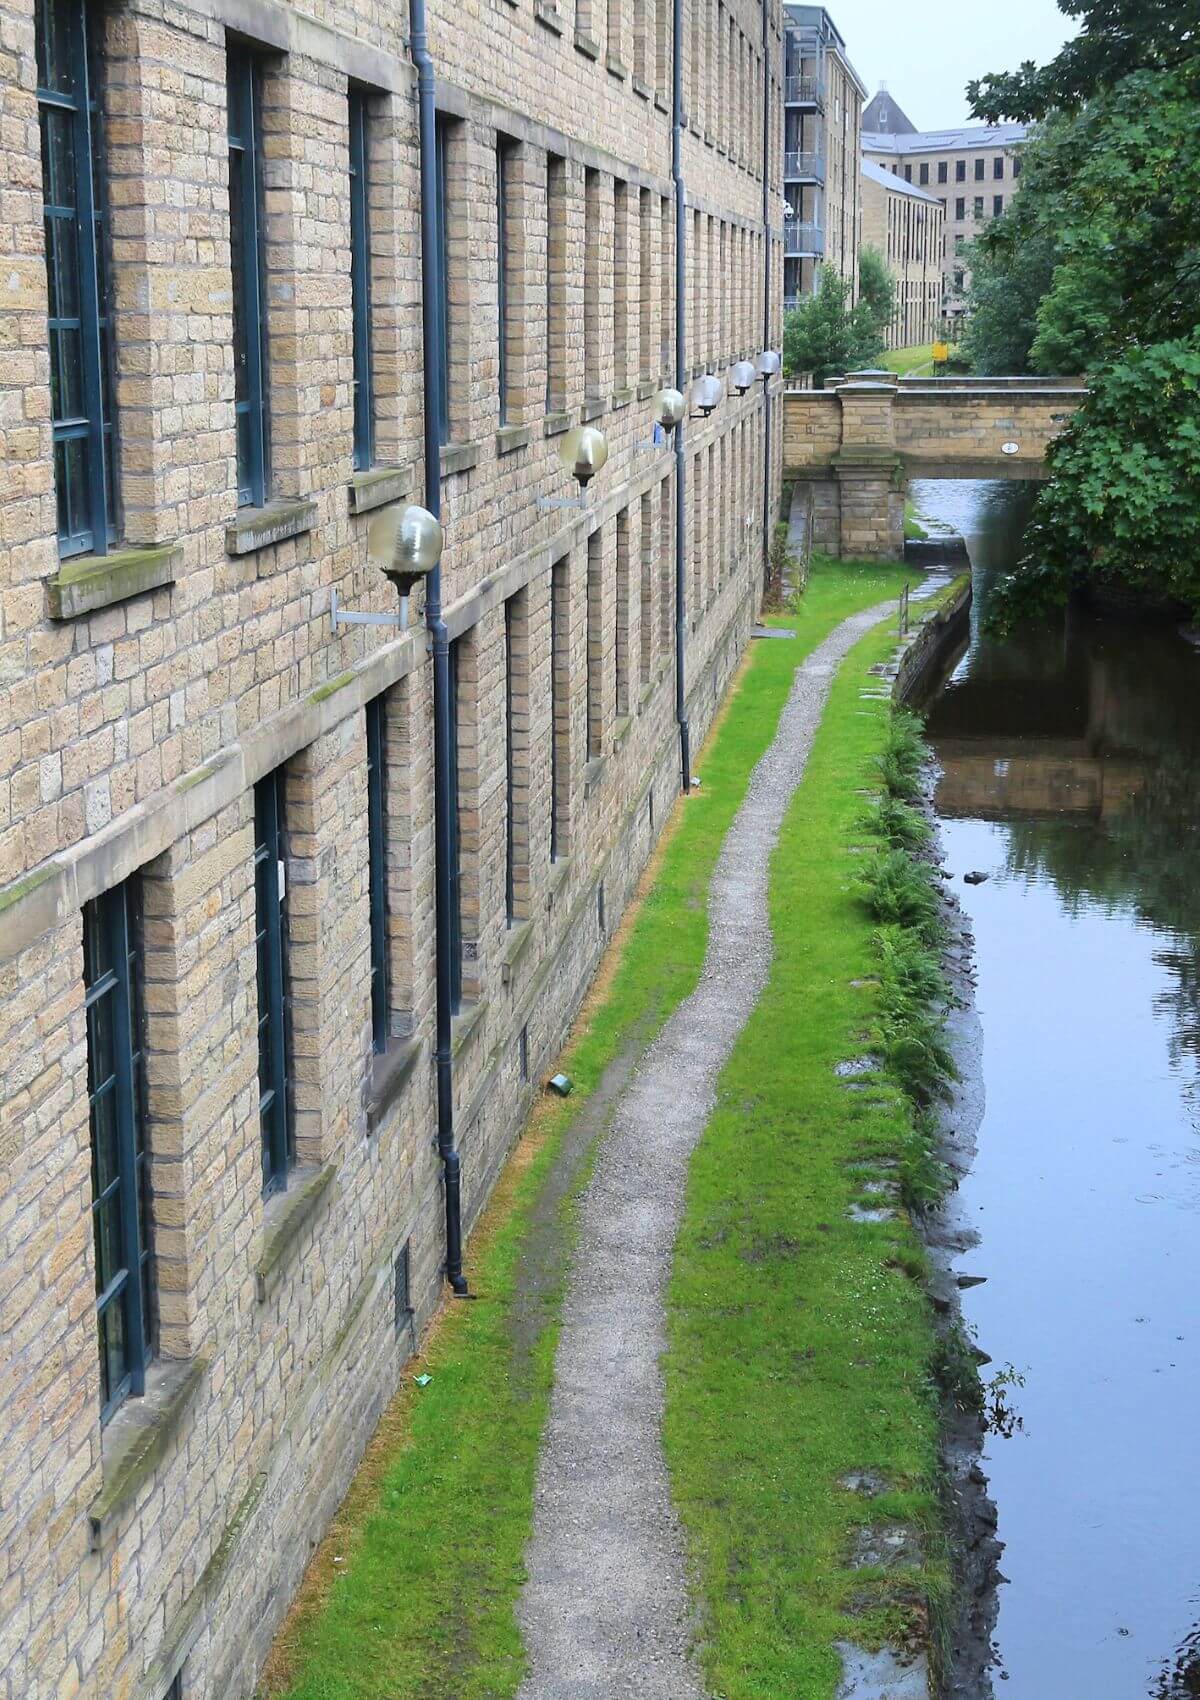 Huddersfield was once one of Yorkshire’s most prominent mill towns